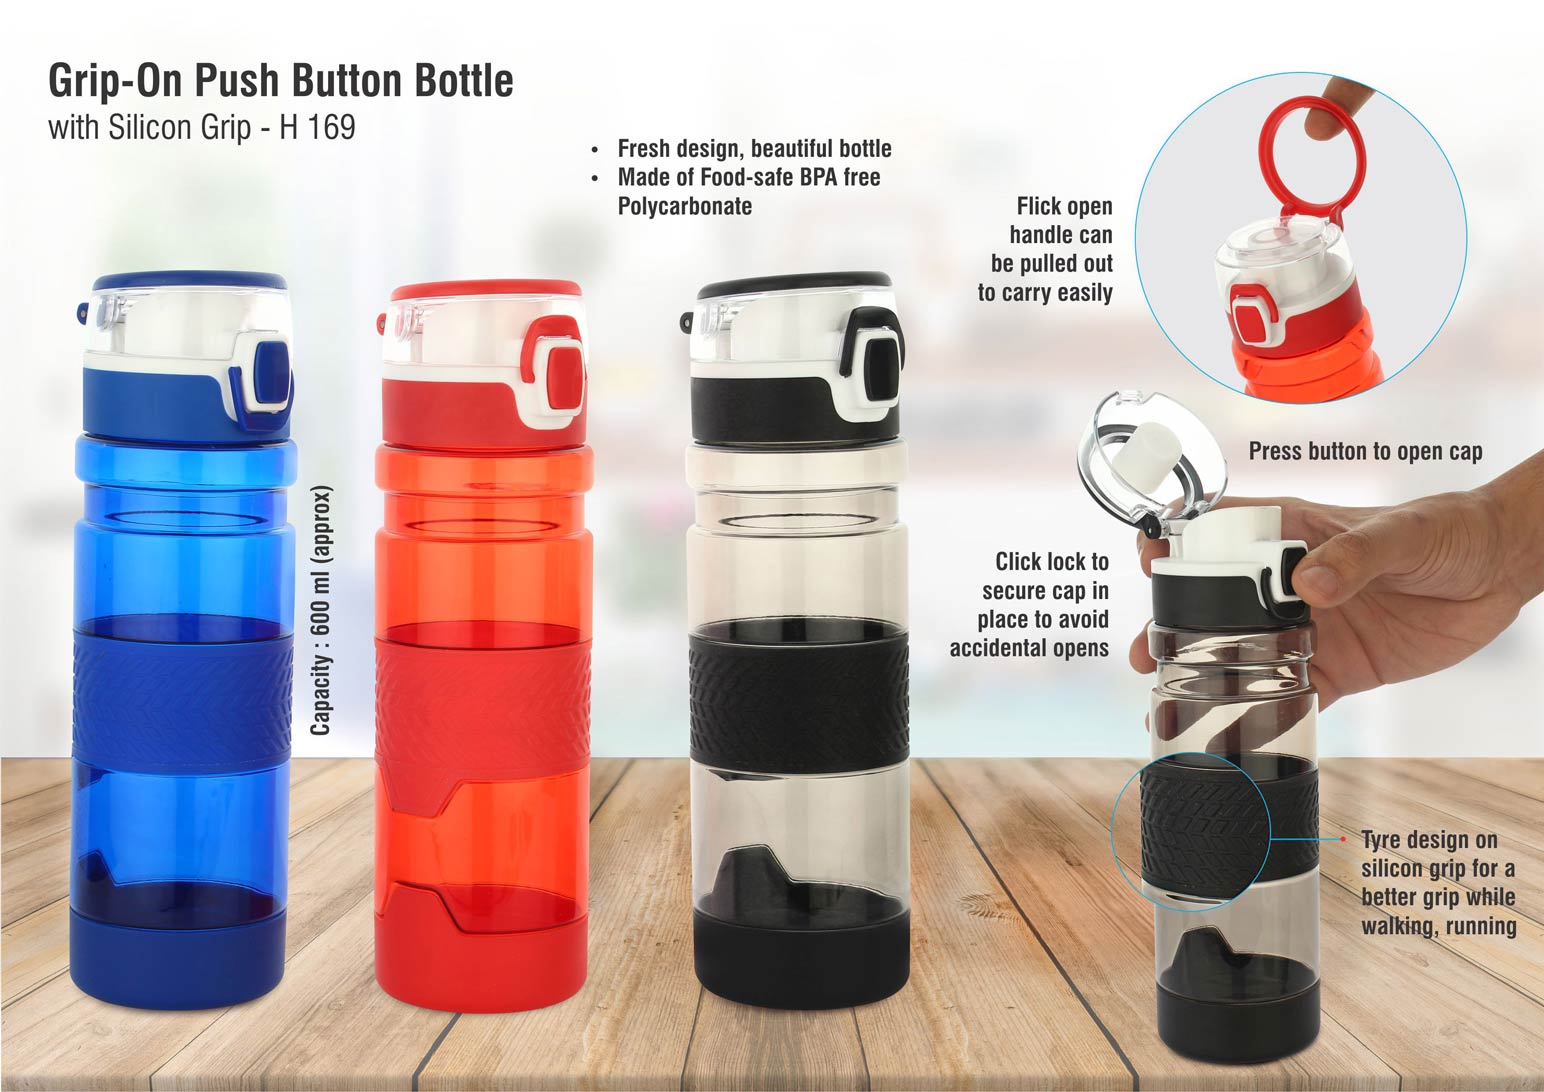 Grip-On Push Button Bottle with Silicon Grip 600ml